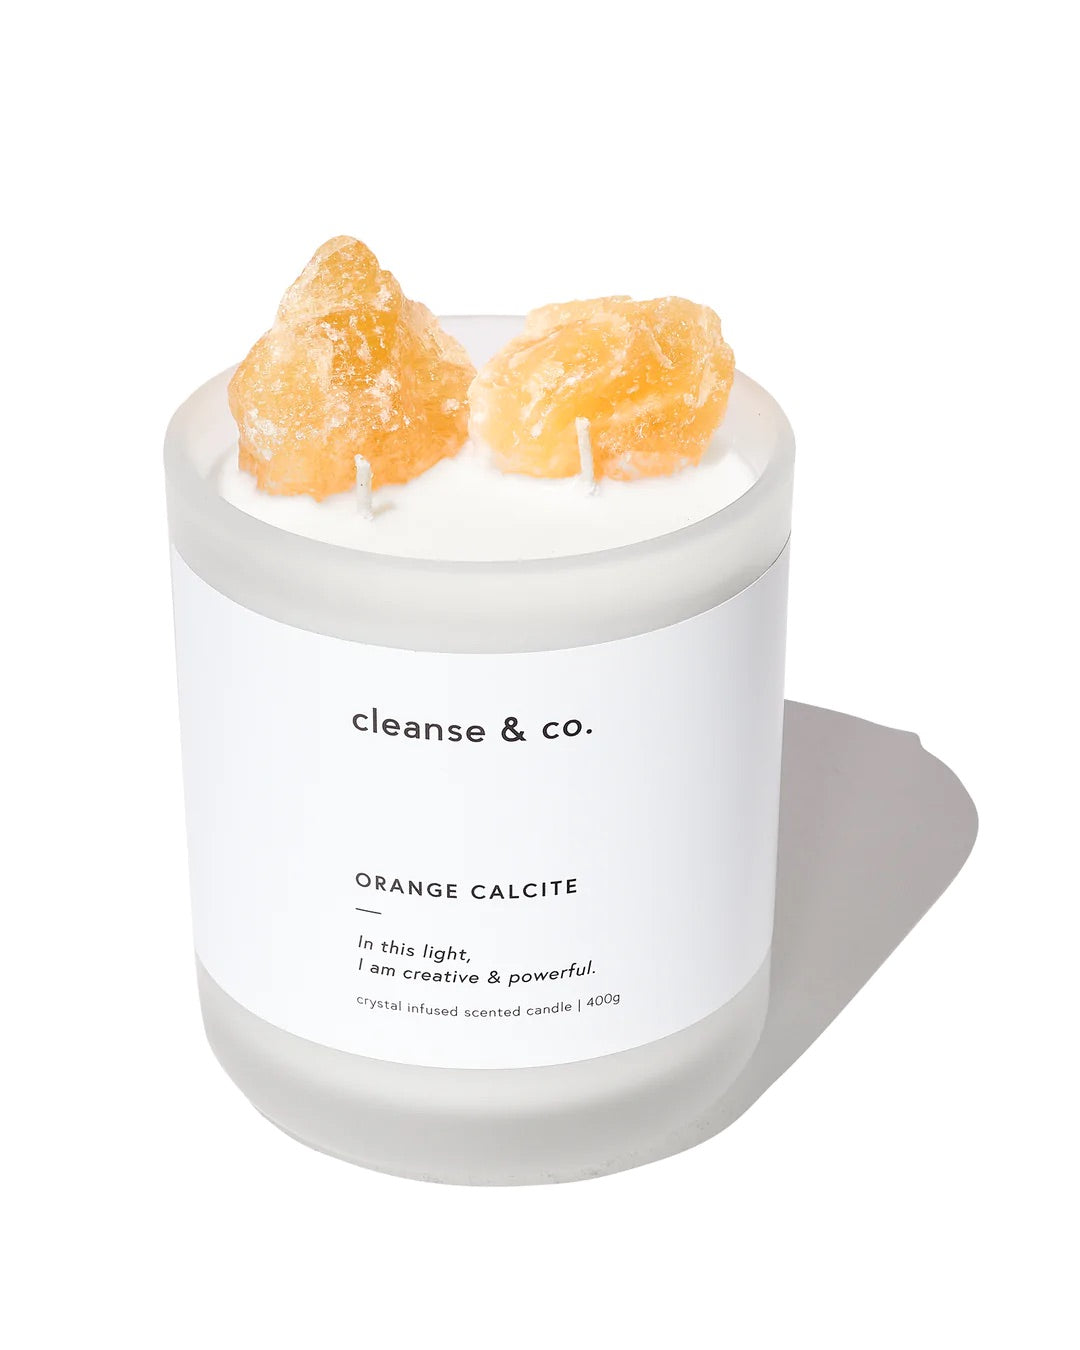 CLEANSE & CO Orange Calcite Candle - 200g